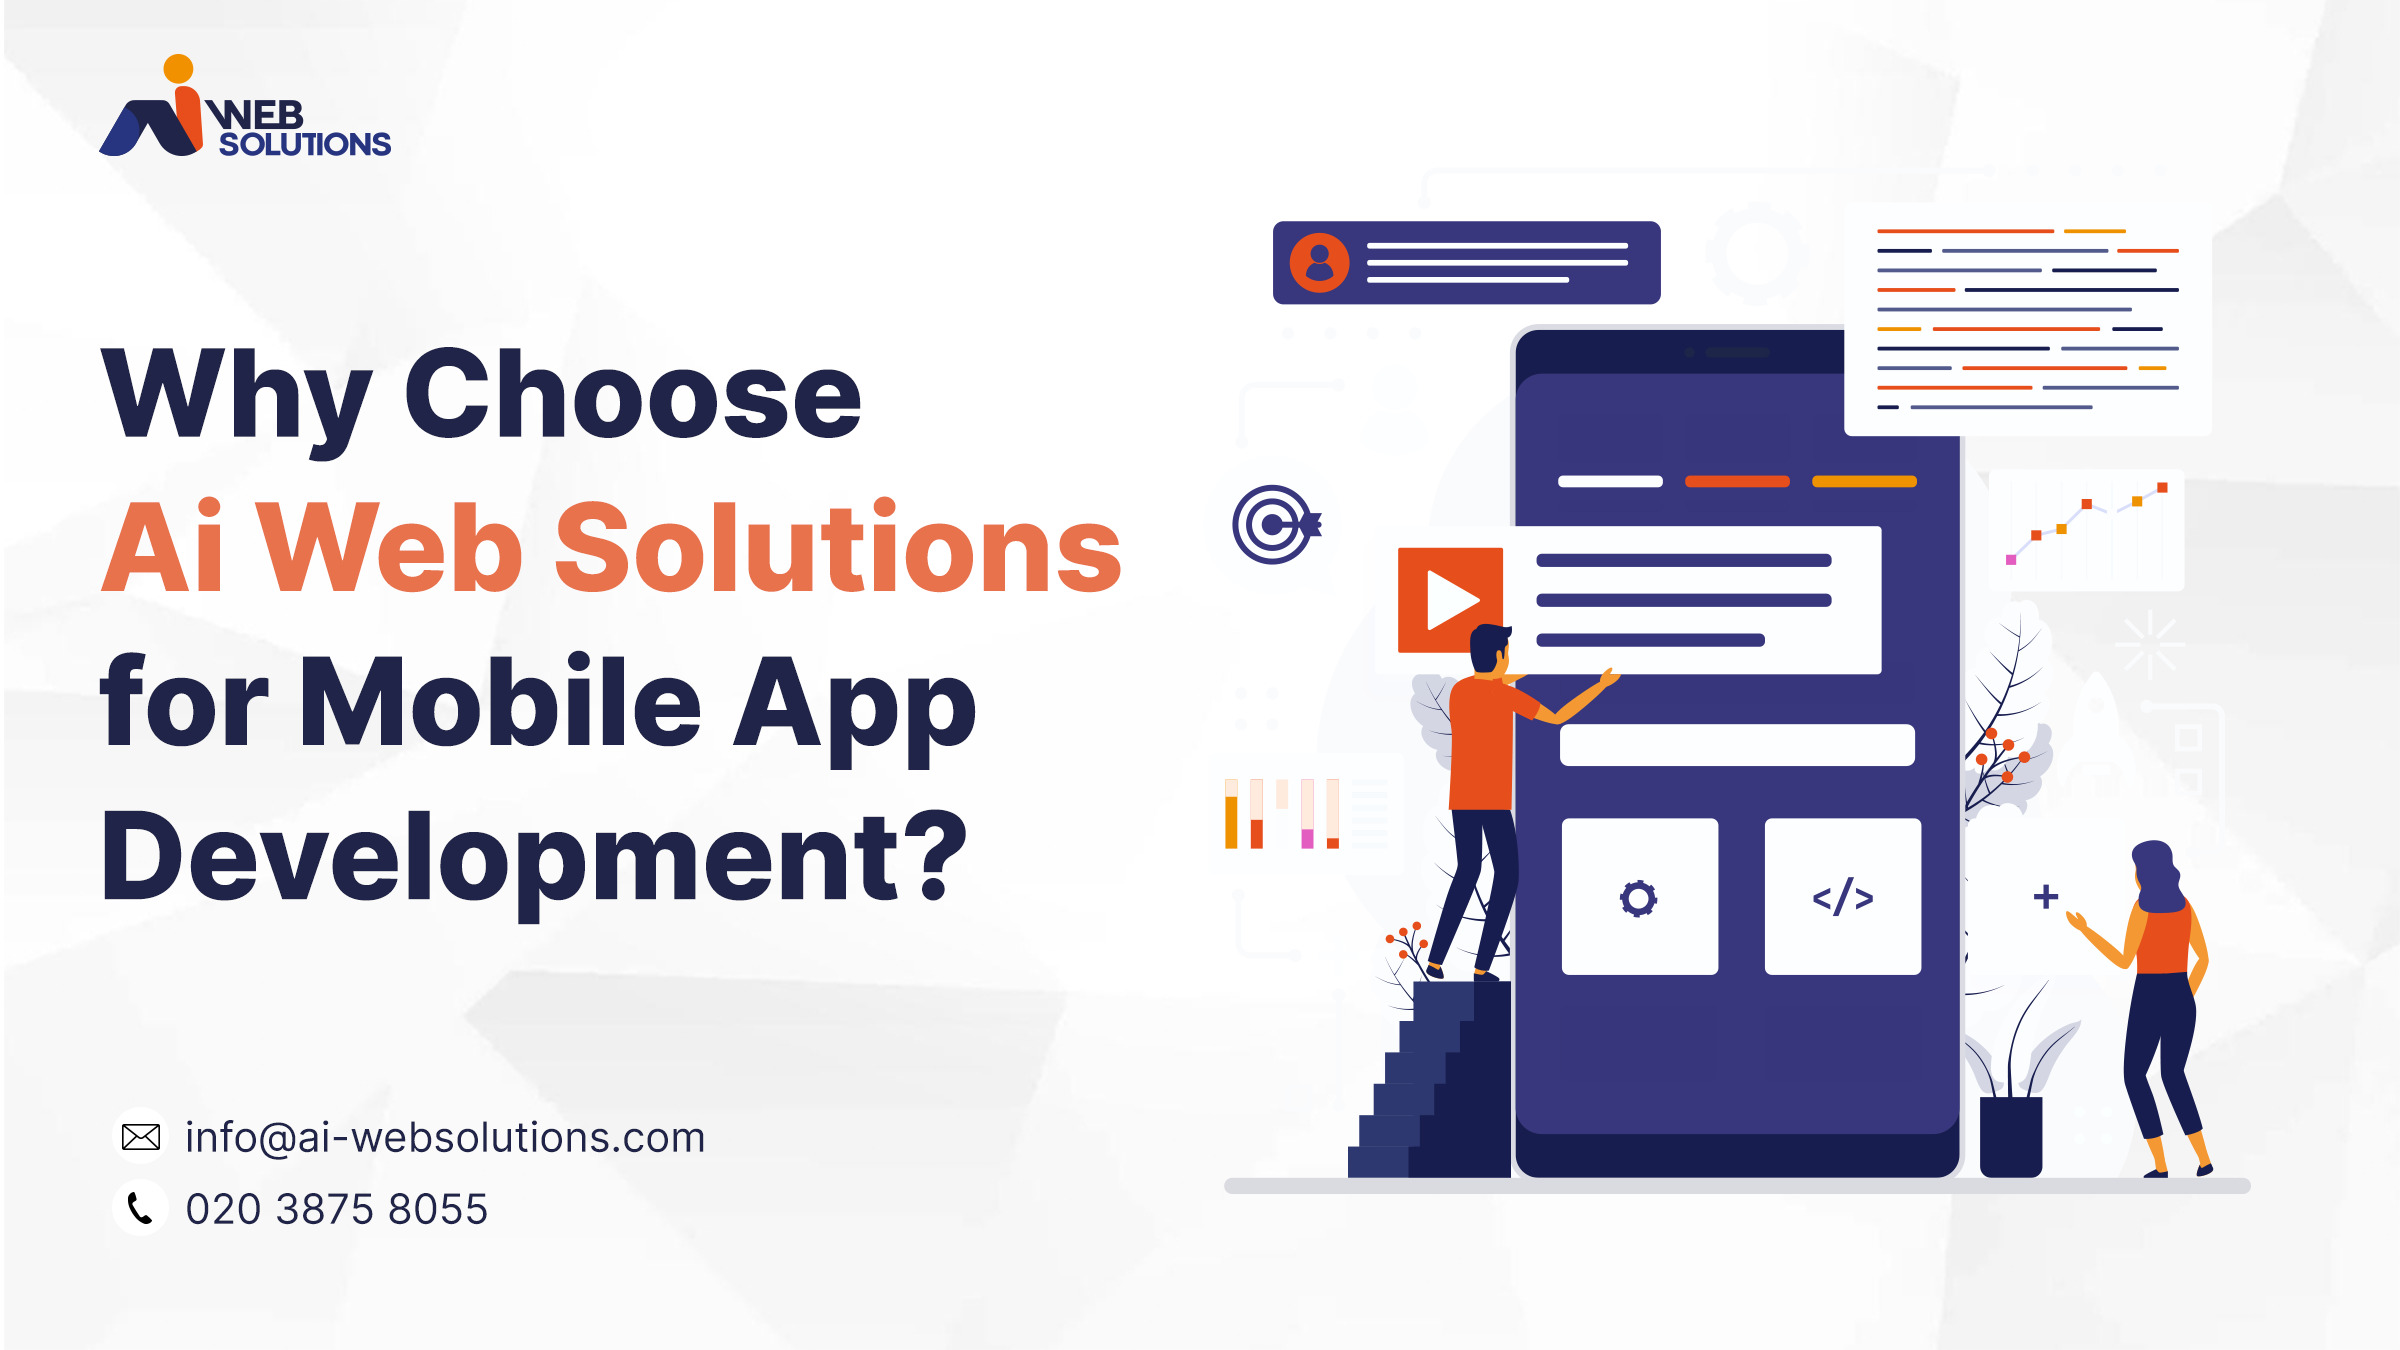 Why Choose Ai Web Solutions for Mobile App Development?